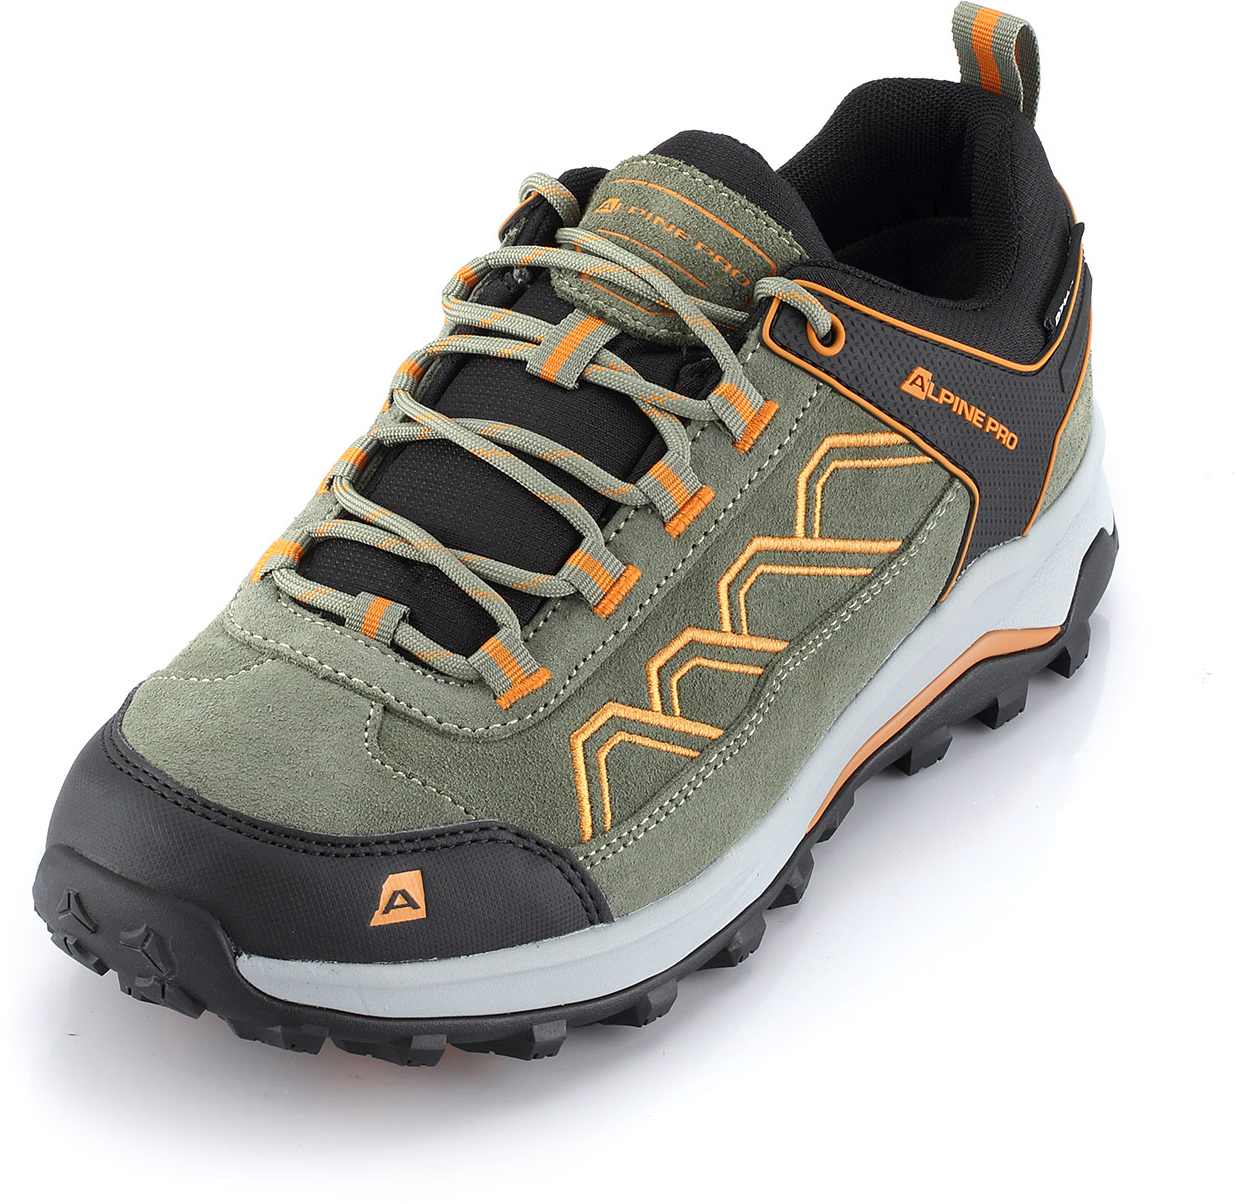 Unisex outdoor shoes